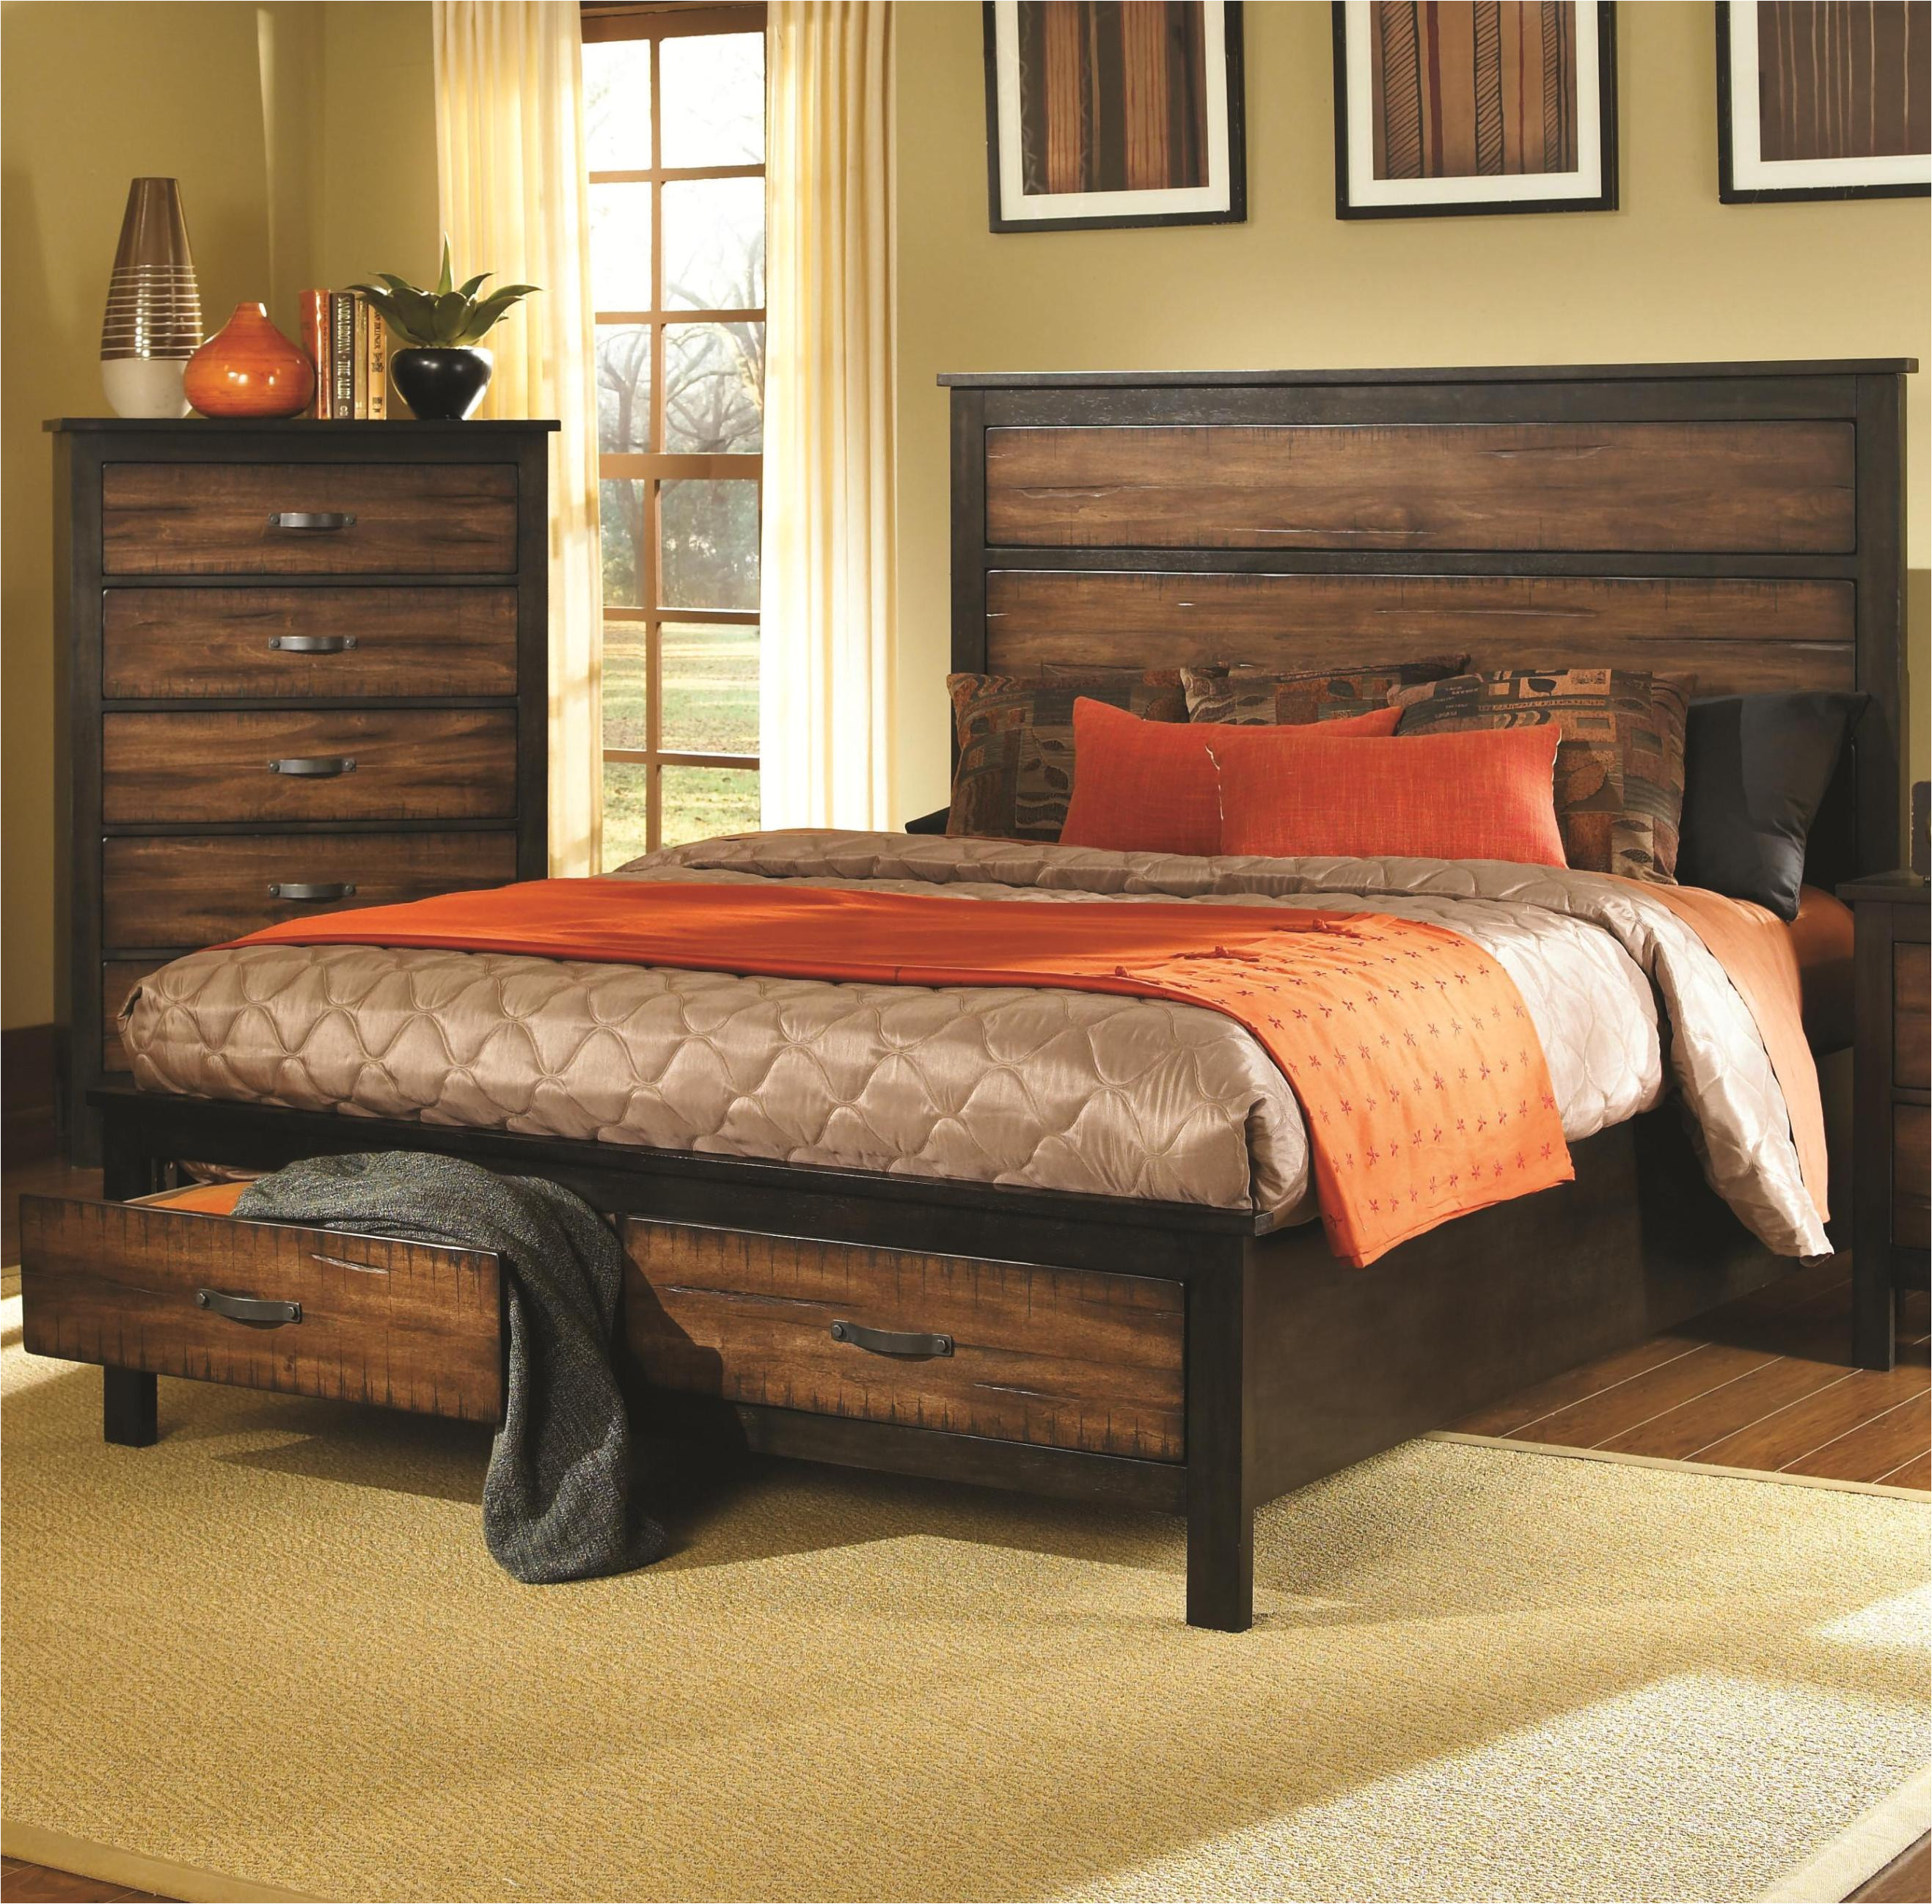 12 photos gallery of stylish california king bed frame with storage